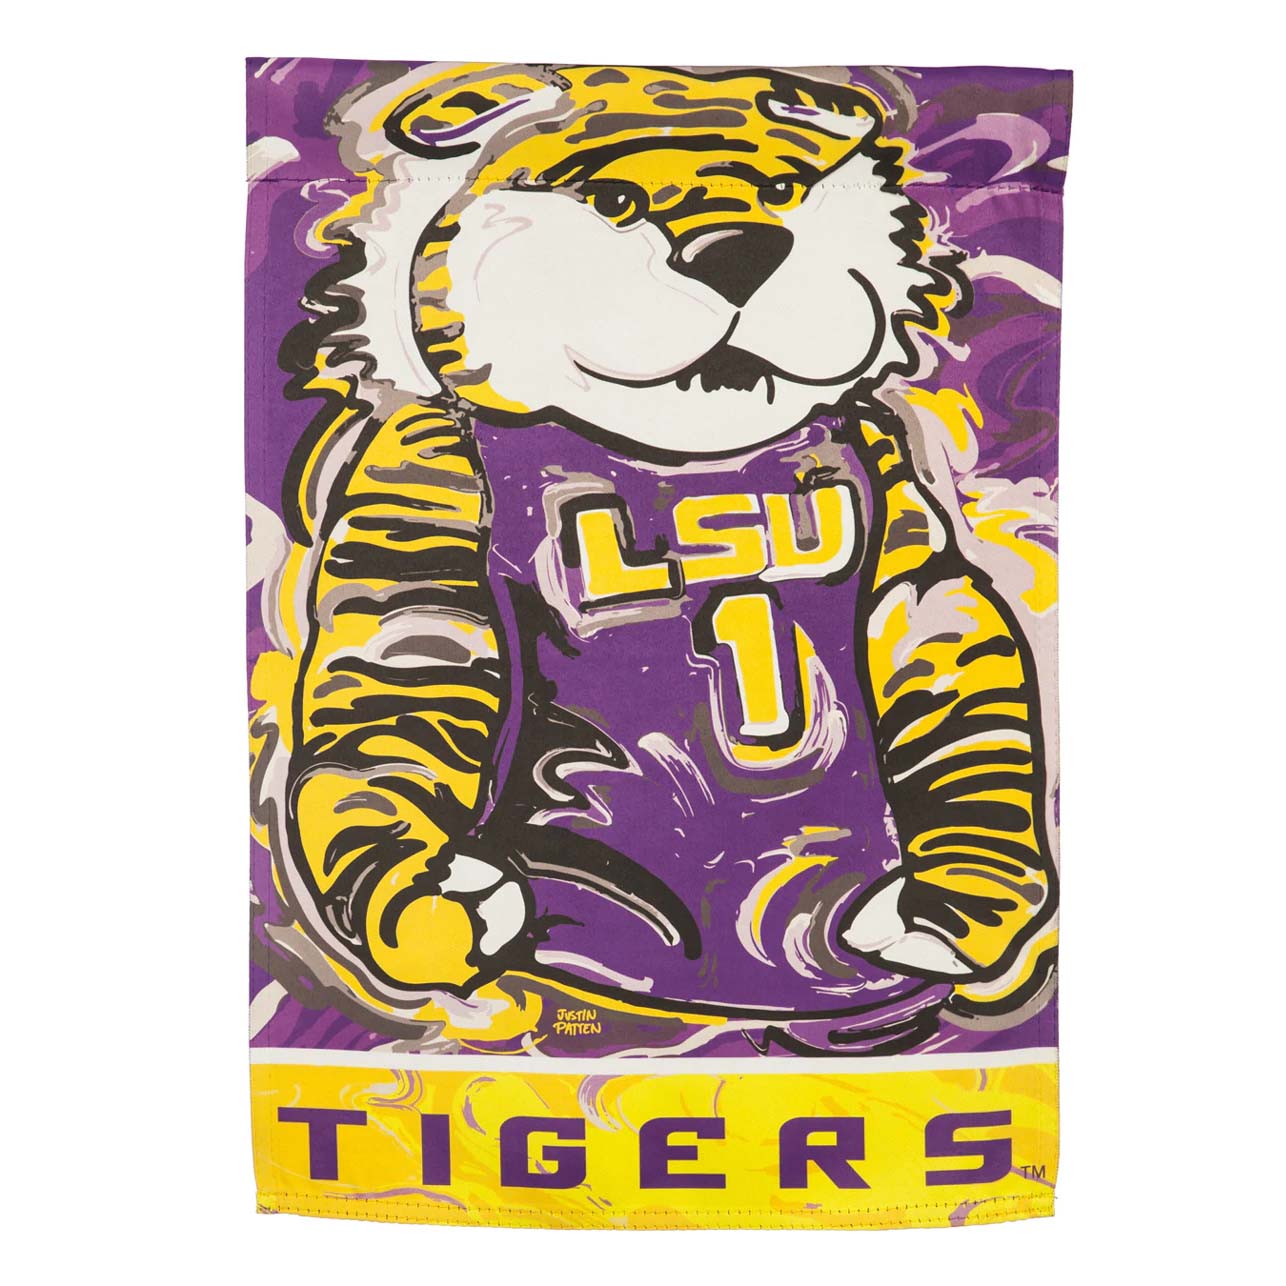 LSU Mascot, Suede Flag, 29"X43", by Justin Patten